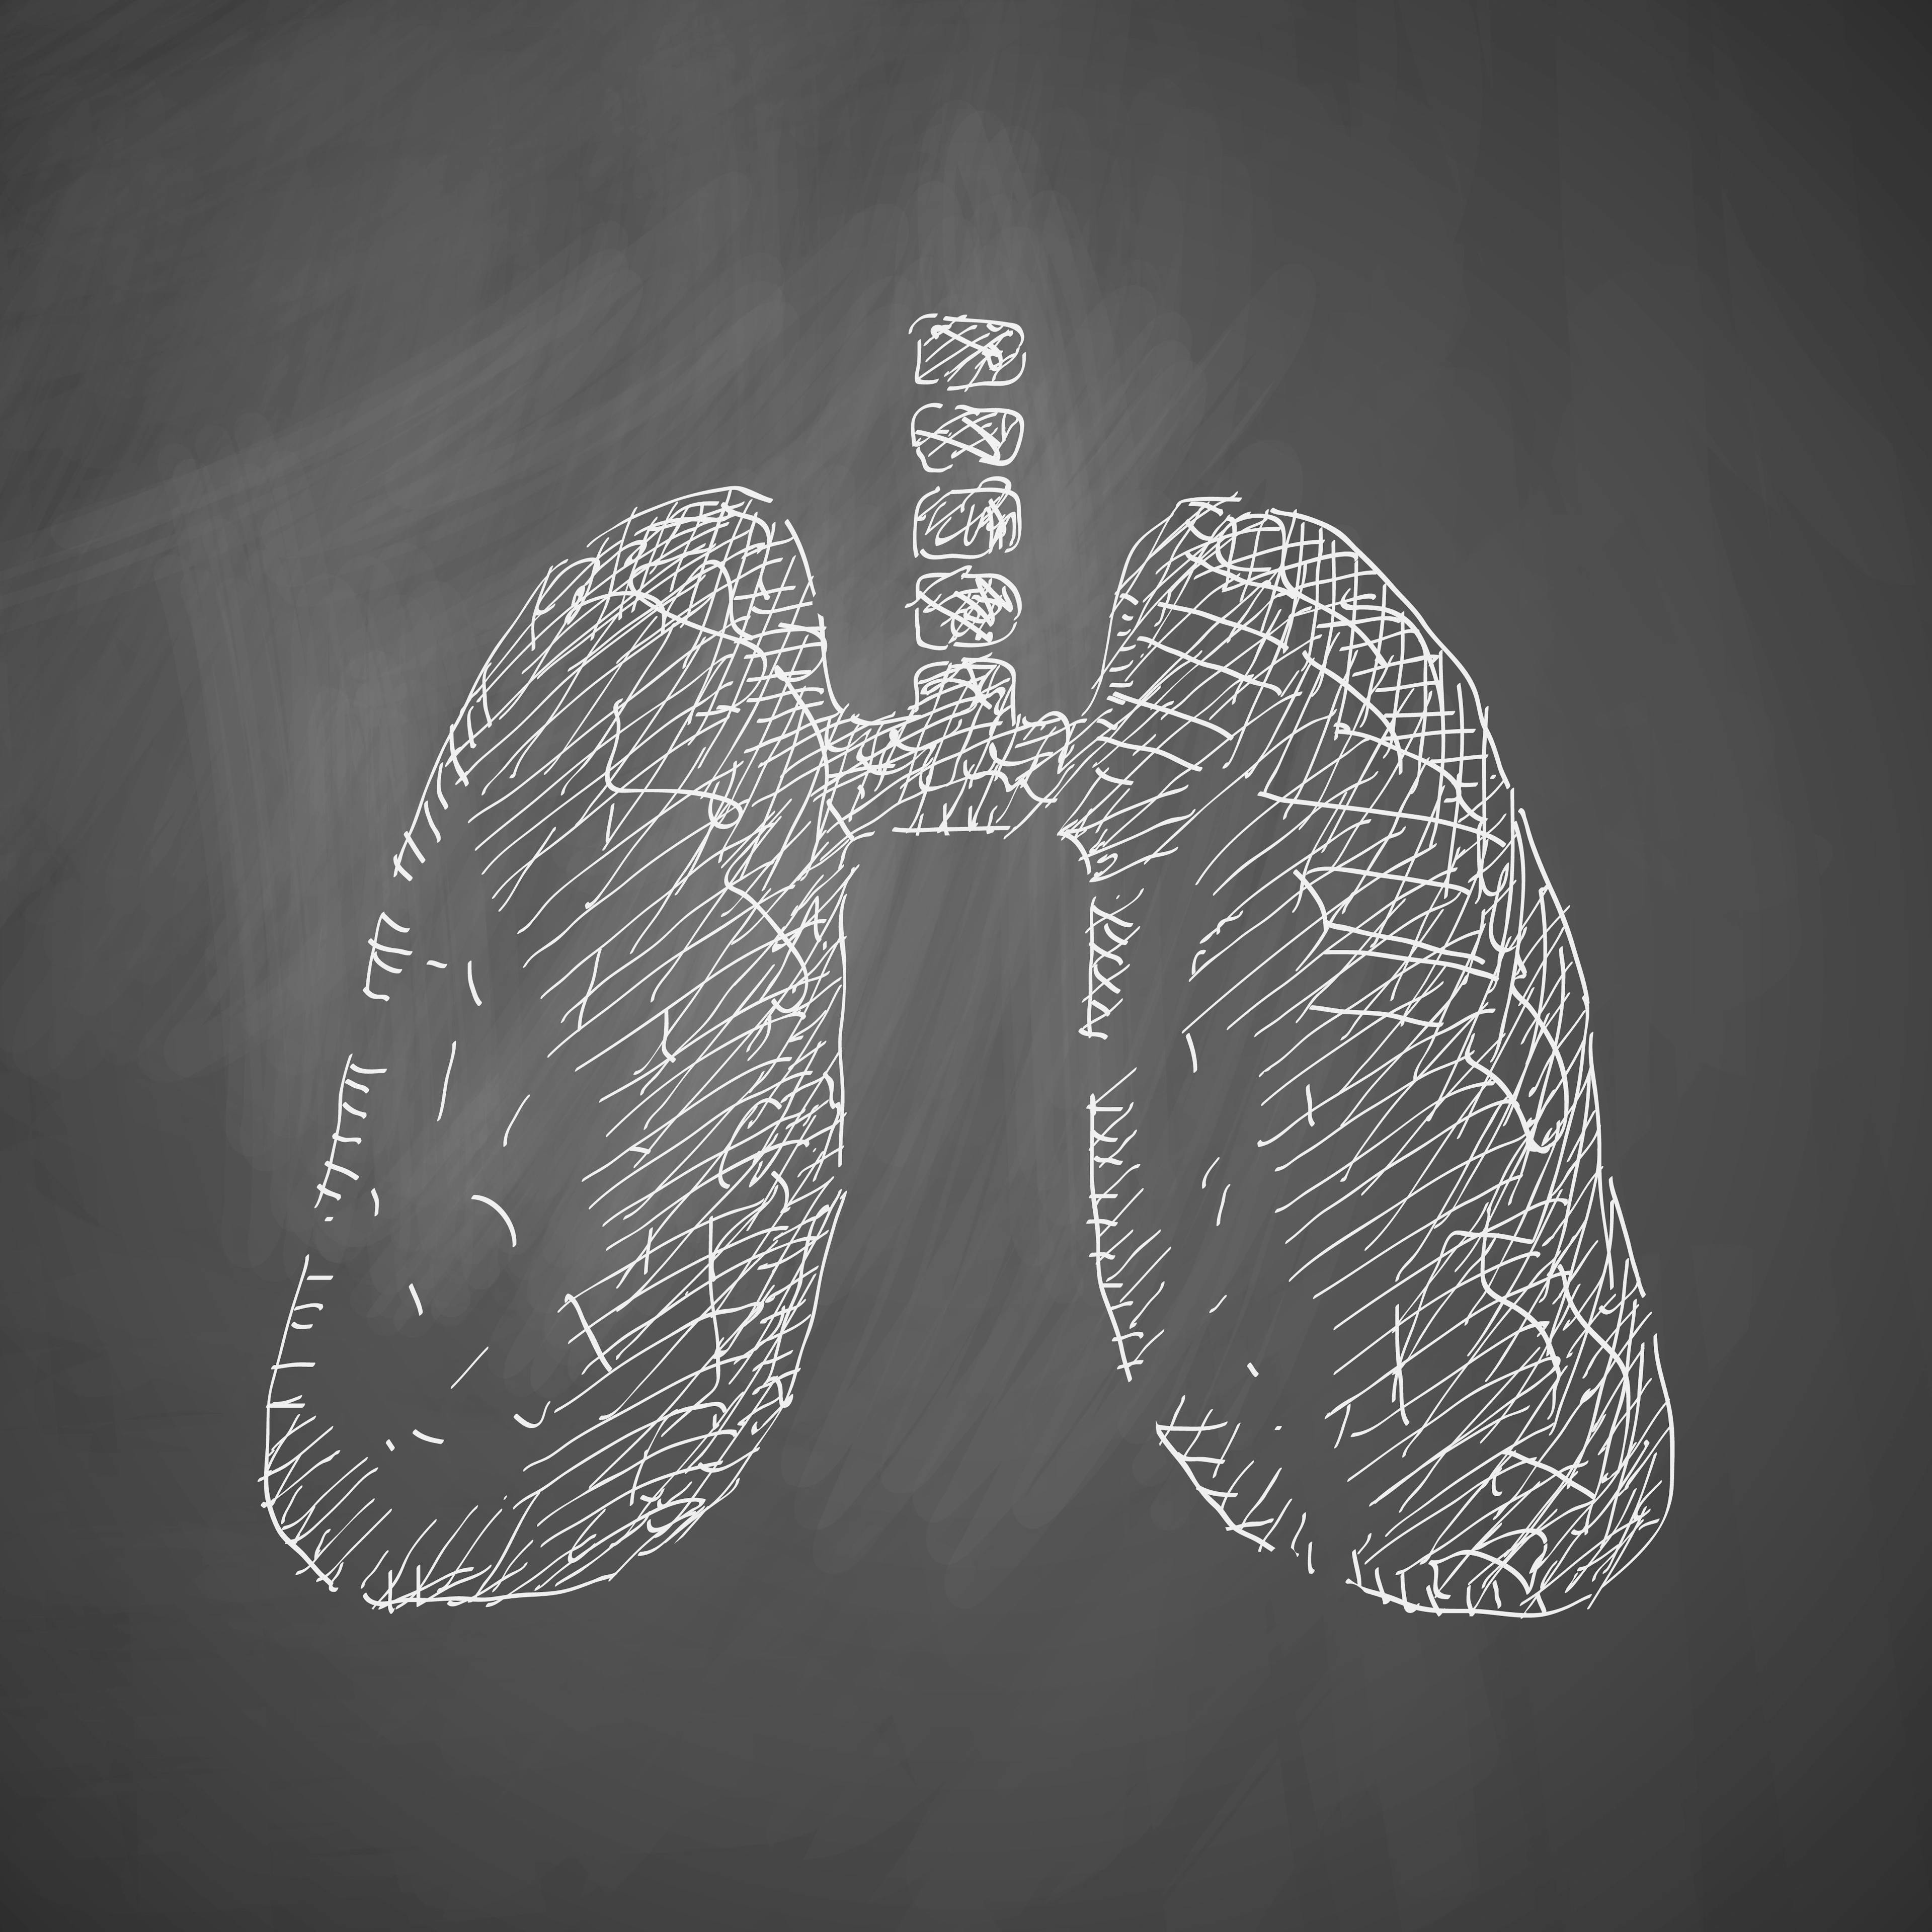 Atezolizumab Leads to Longer OS for Some Types of Advanced NSCLC, Study Says